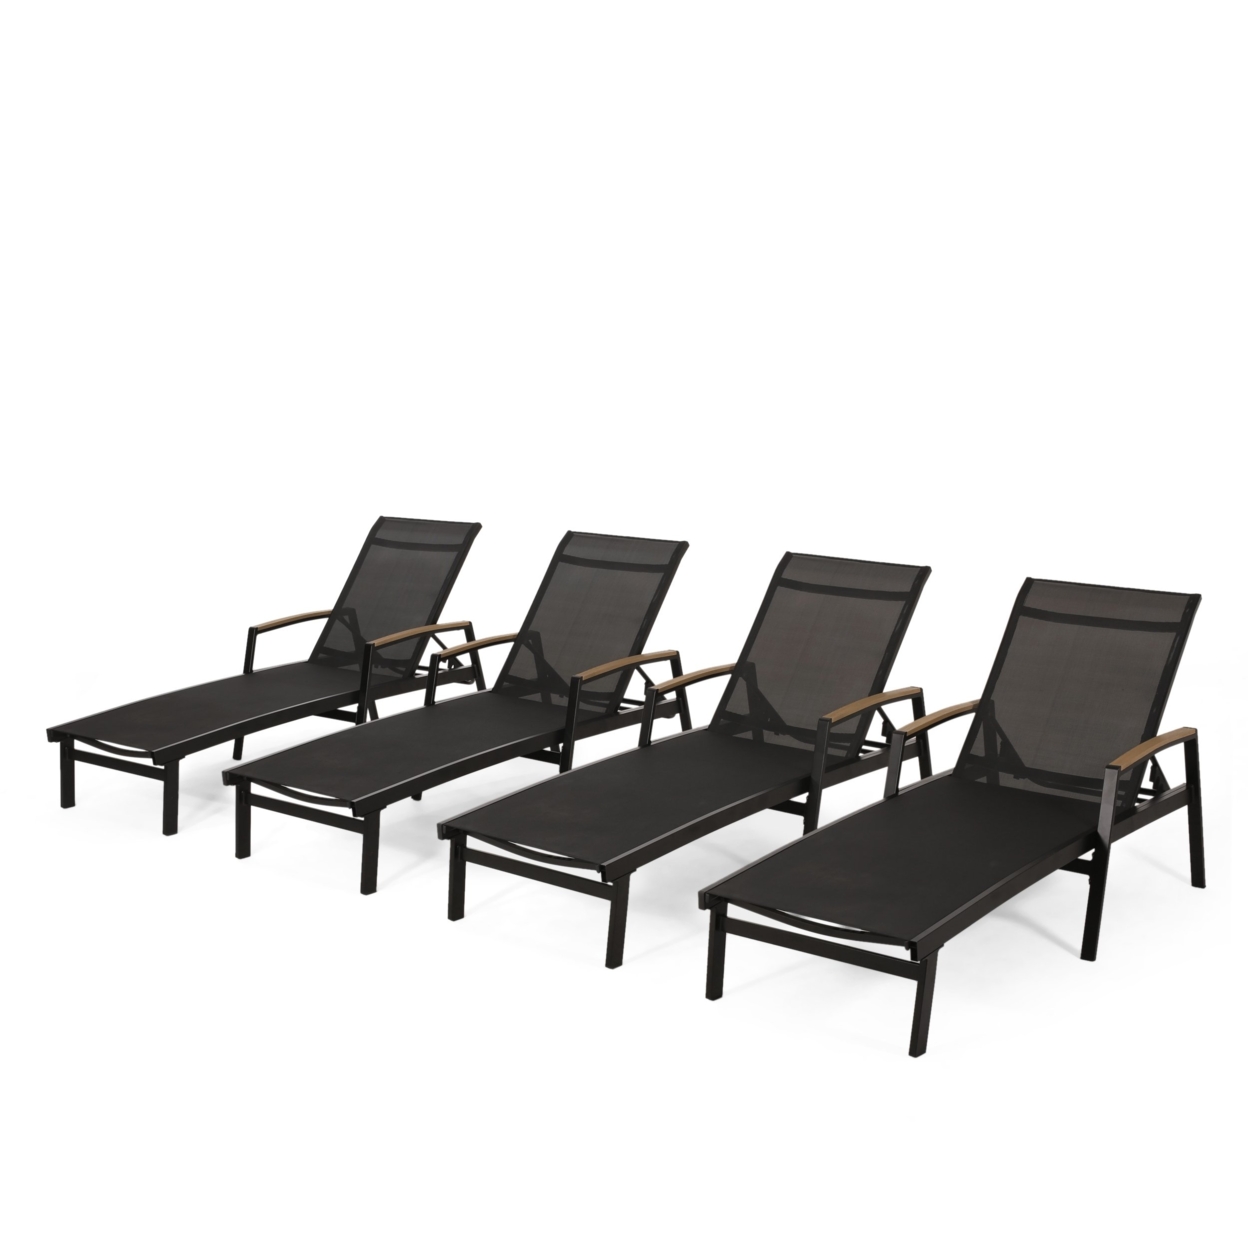 Joy Outdoor Aluminum Chaise Lounge With Mesh Seating (Set Of 4) - White